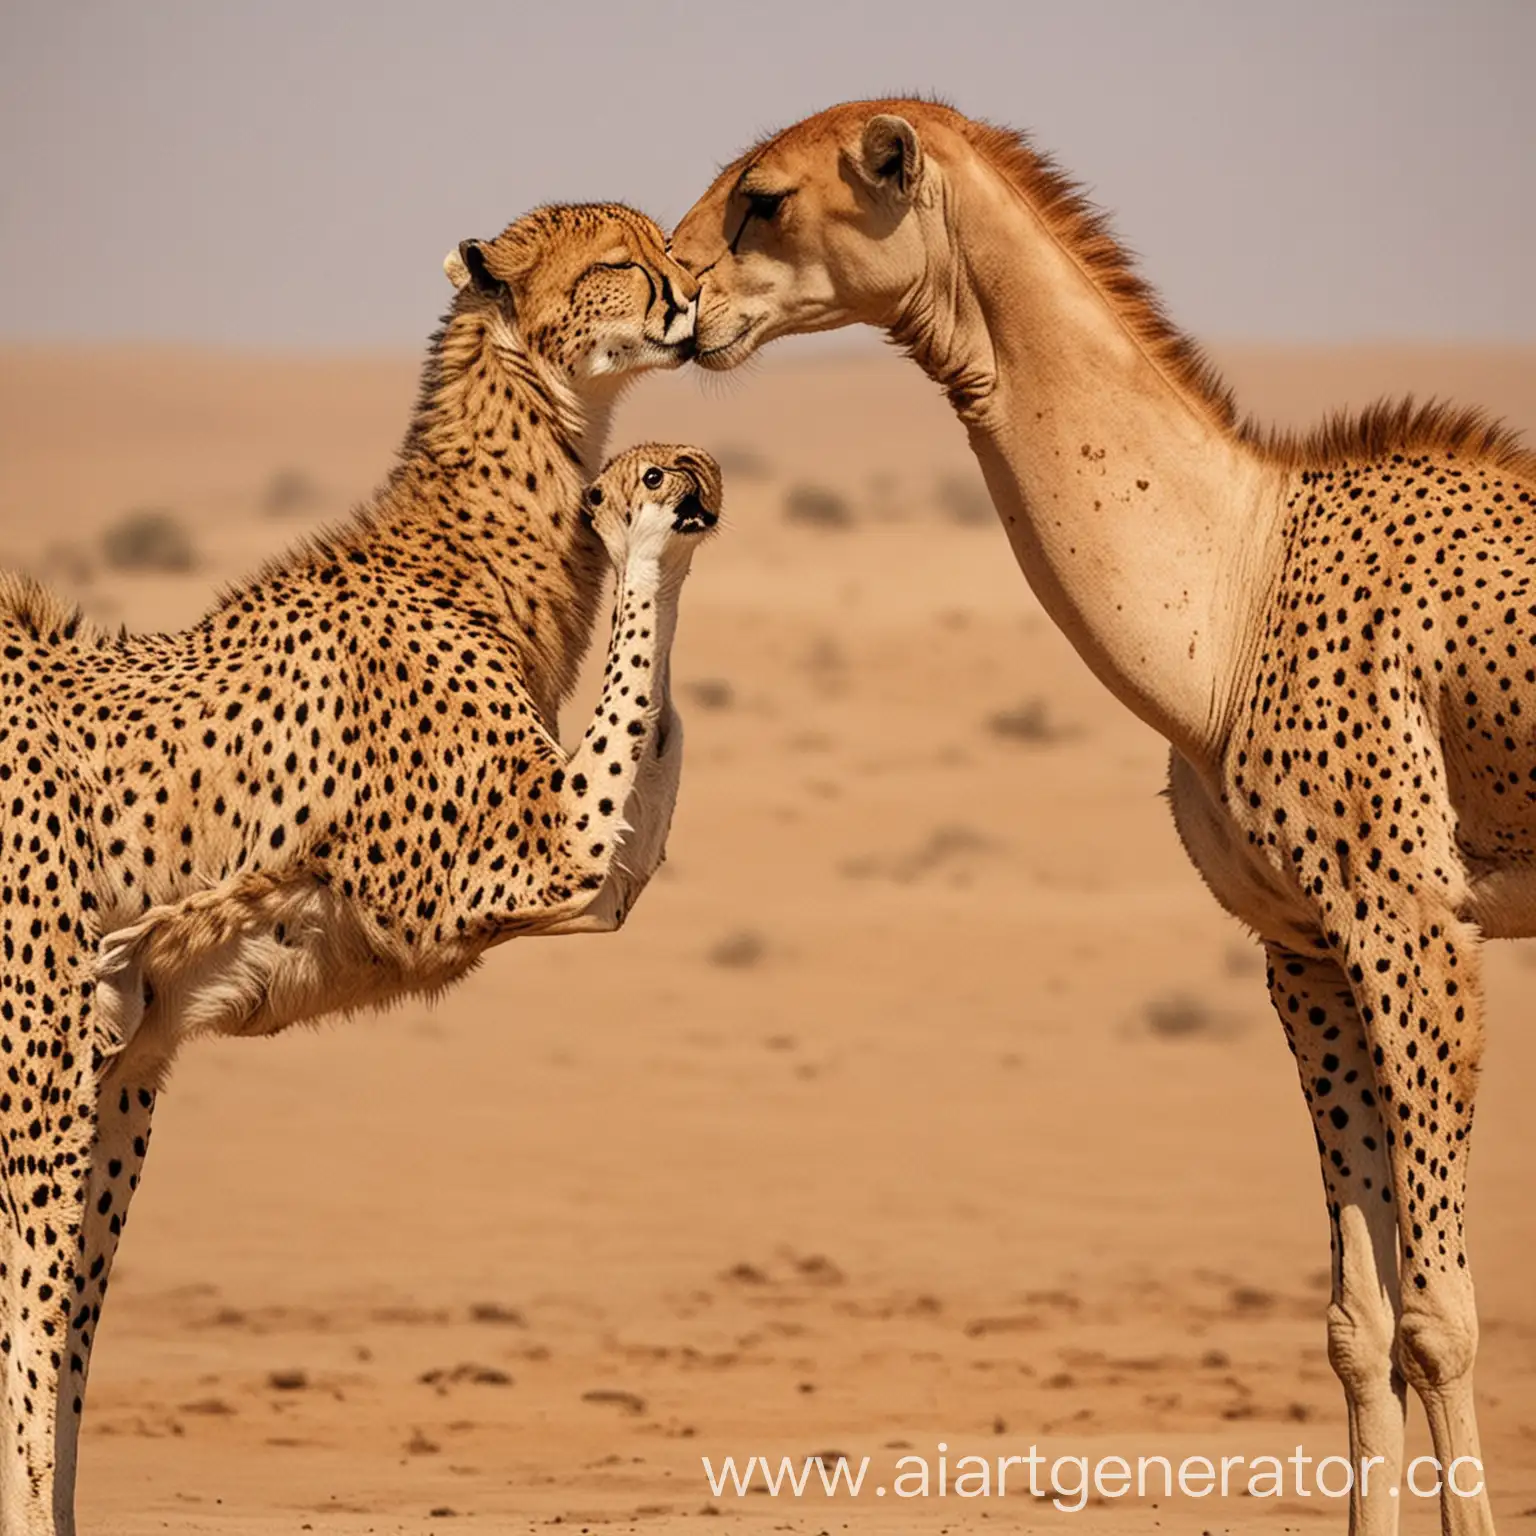 Interspecies-Affection-Cheetah-and-Camel-Bonding-in-the-Wild